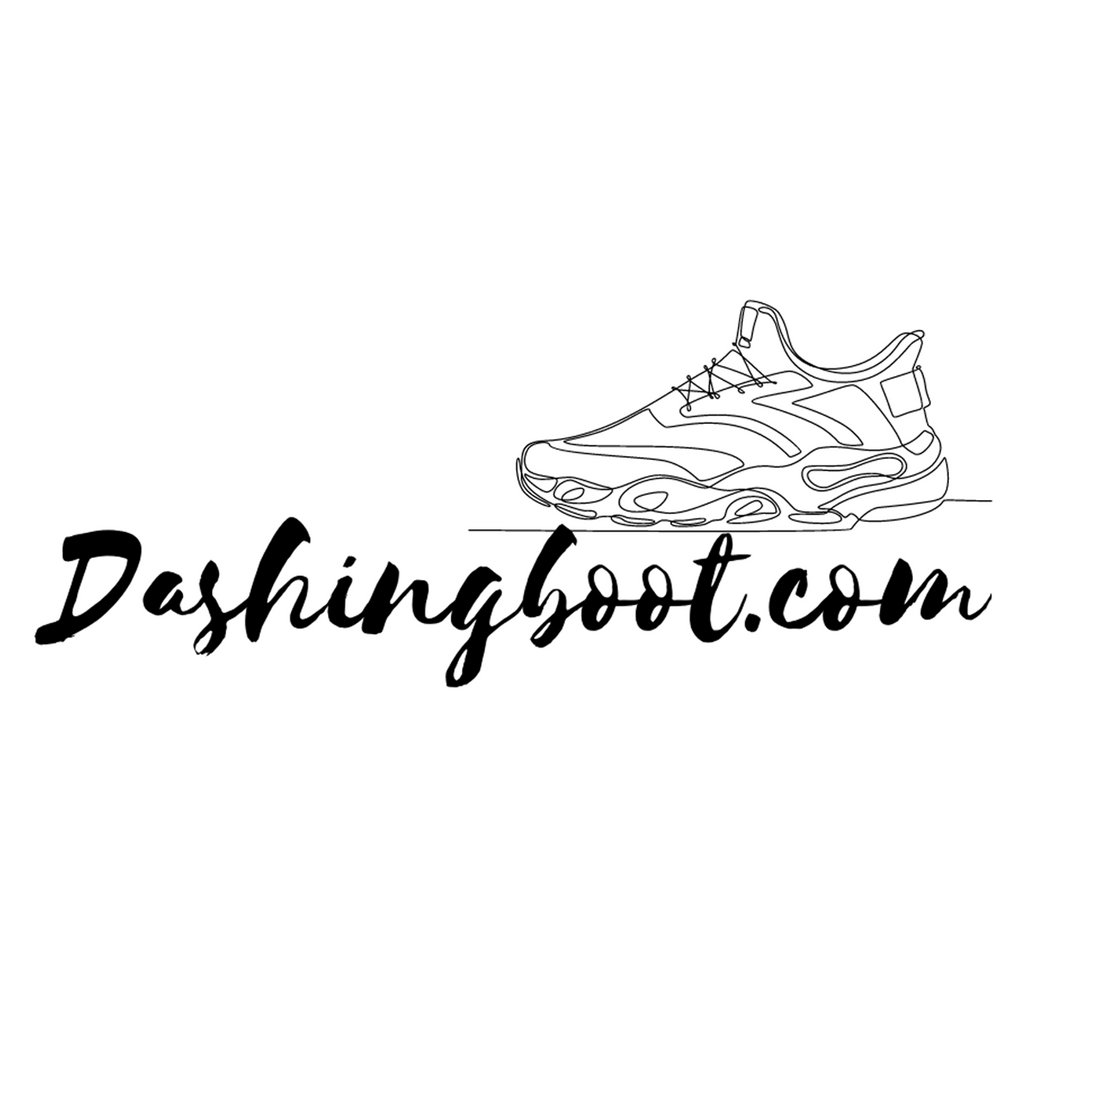 Dashingboot.com, Buy Luxury Brands First Copy Shoes Online!!!